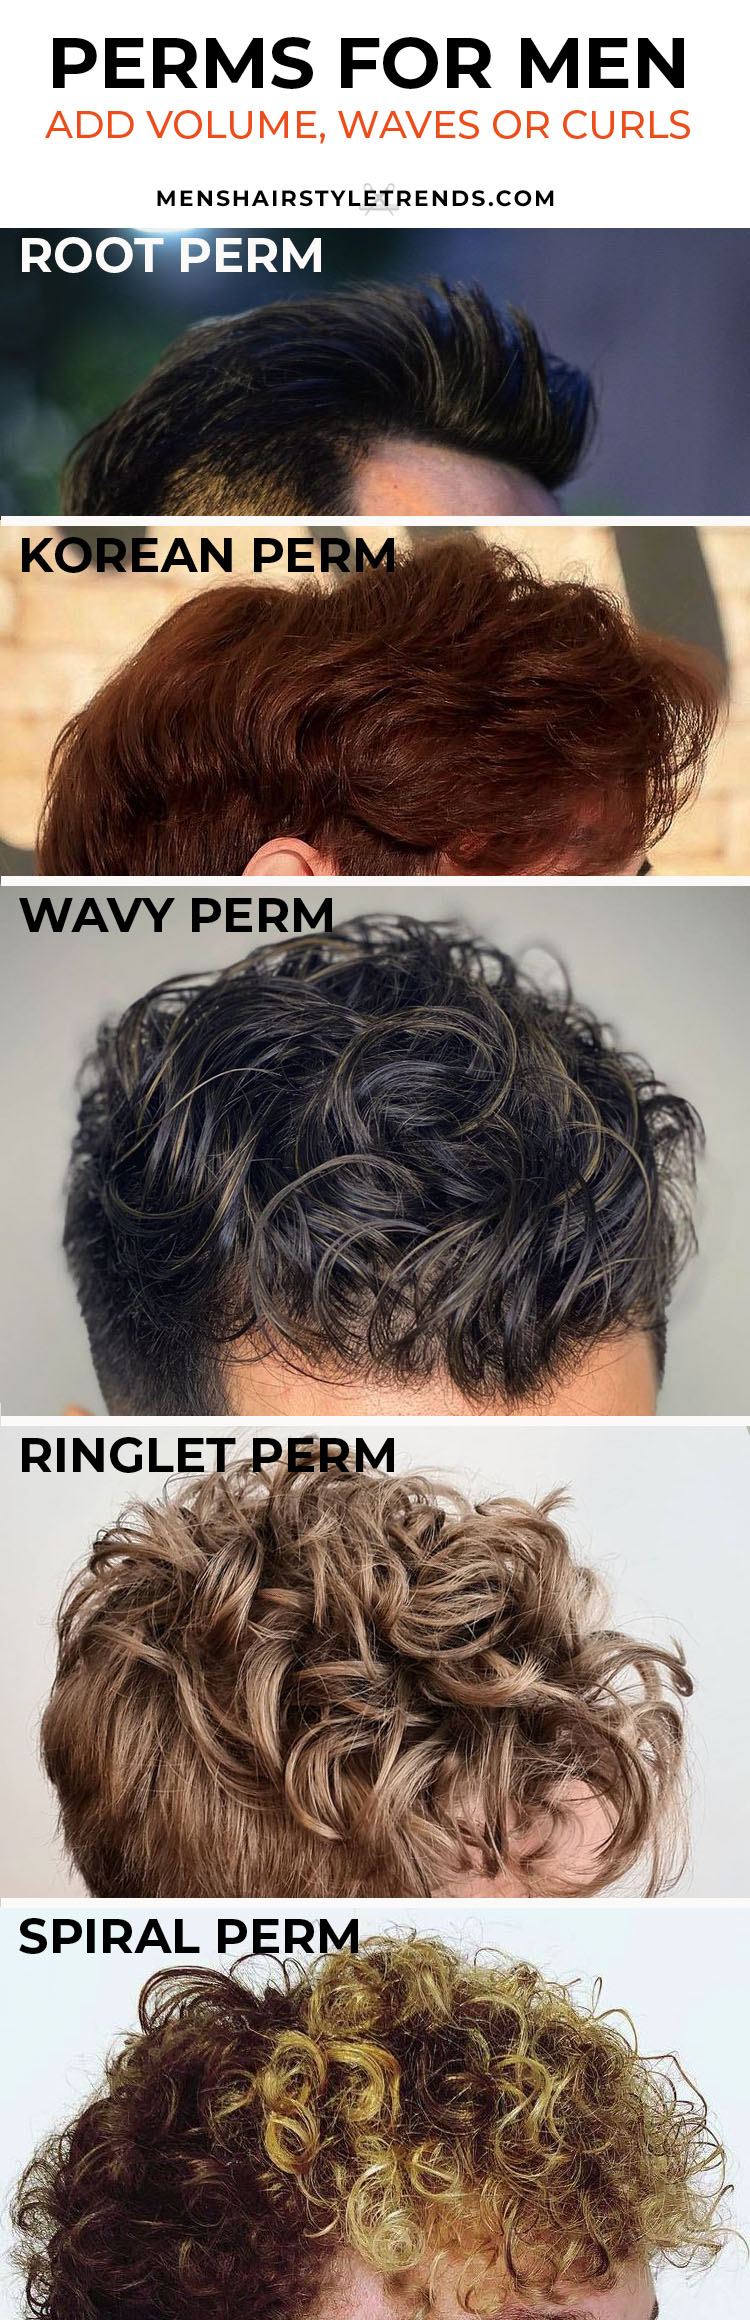 Perm hairstyles for men